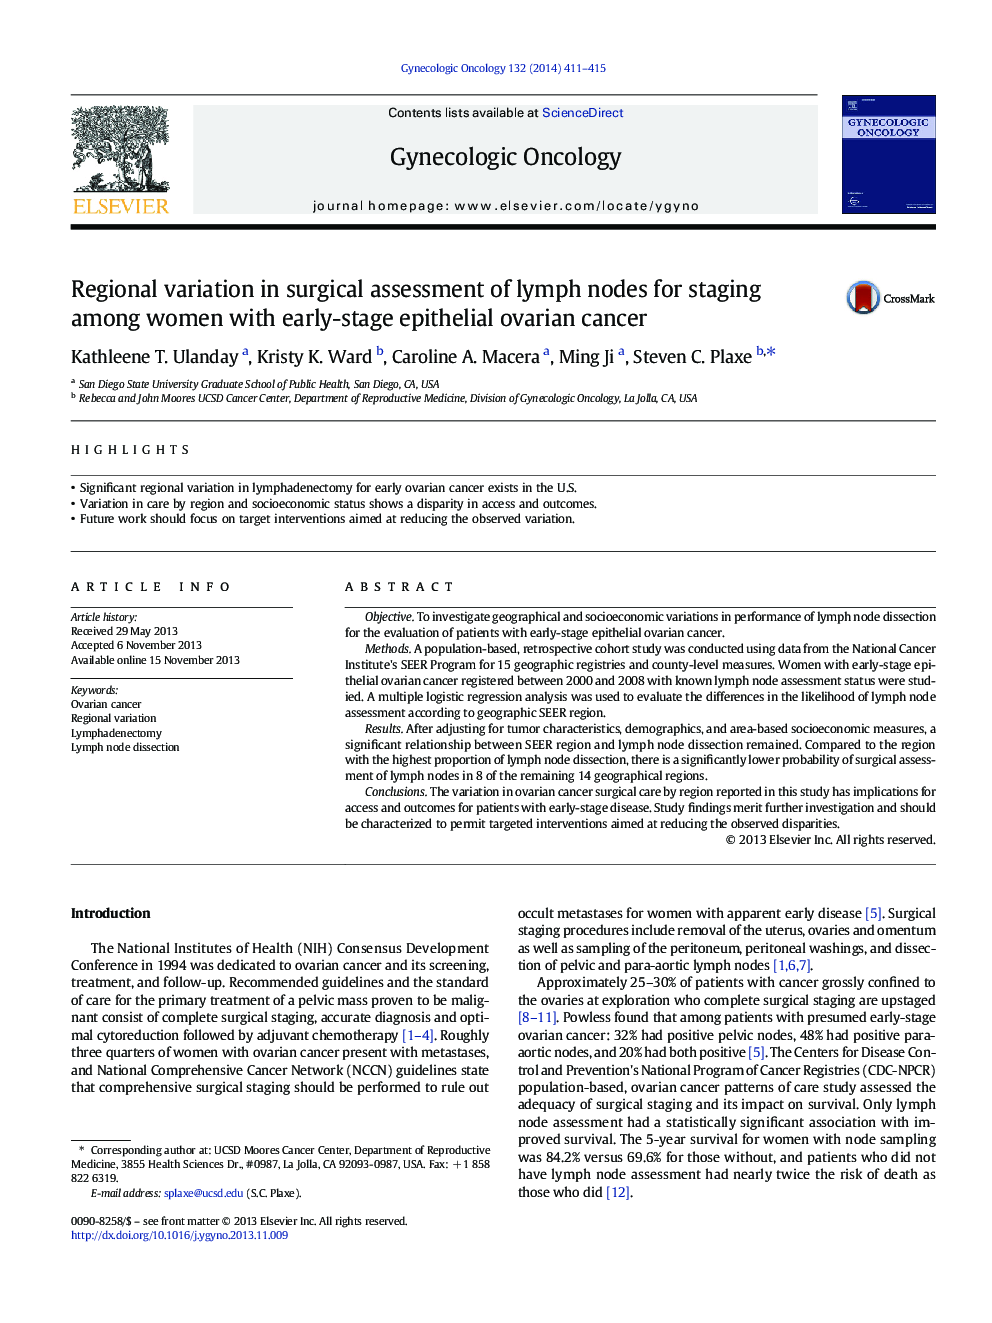 Regional variation in surgical assessment of lymph nodes for staging among women with early-stage epithelial ovarian cancer